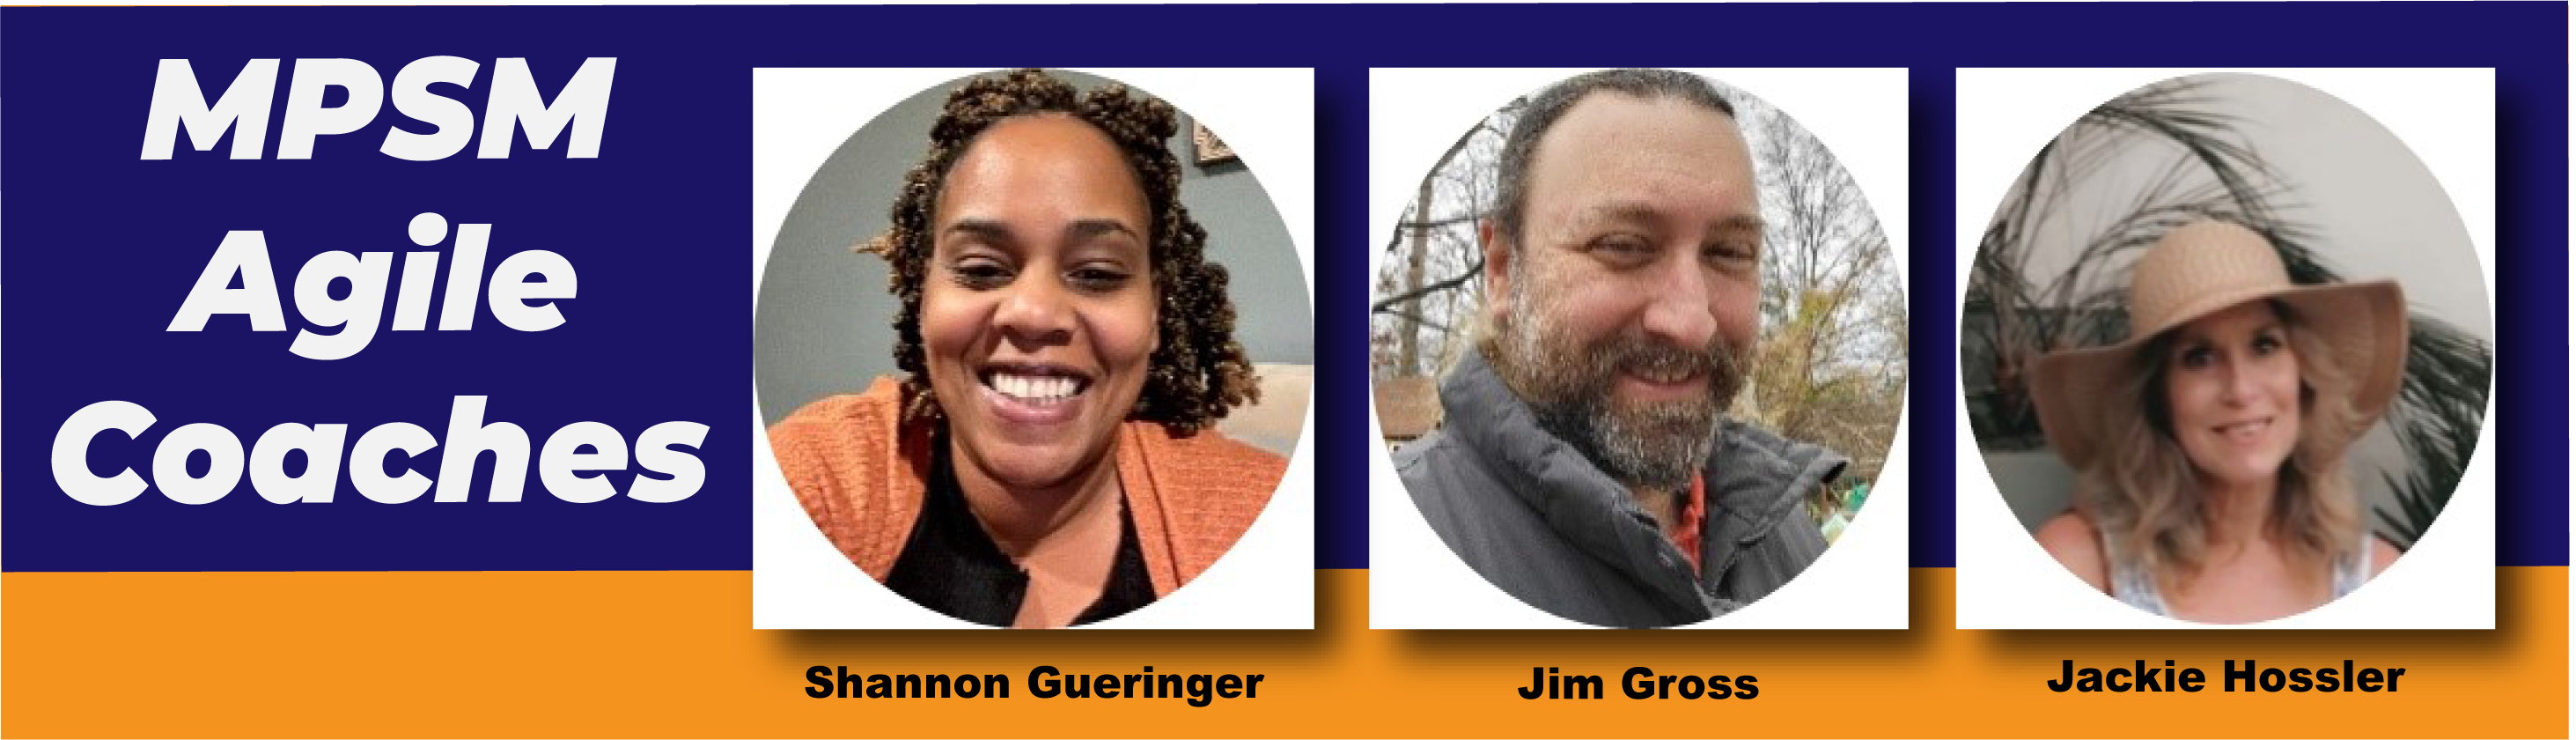 Photos of MPSM Agile Coaches Shannon Gueringer, Jim Gross, and Jackie Hossler